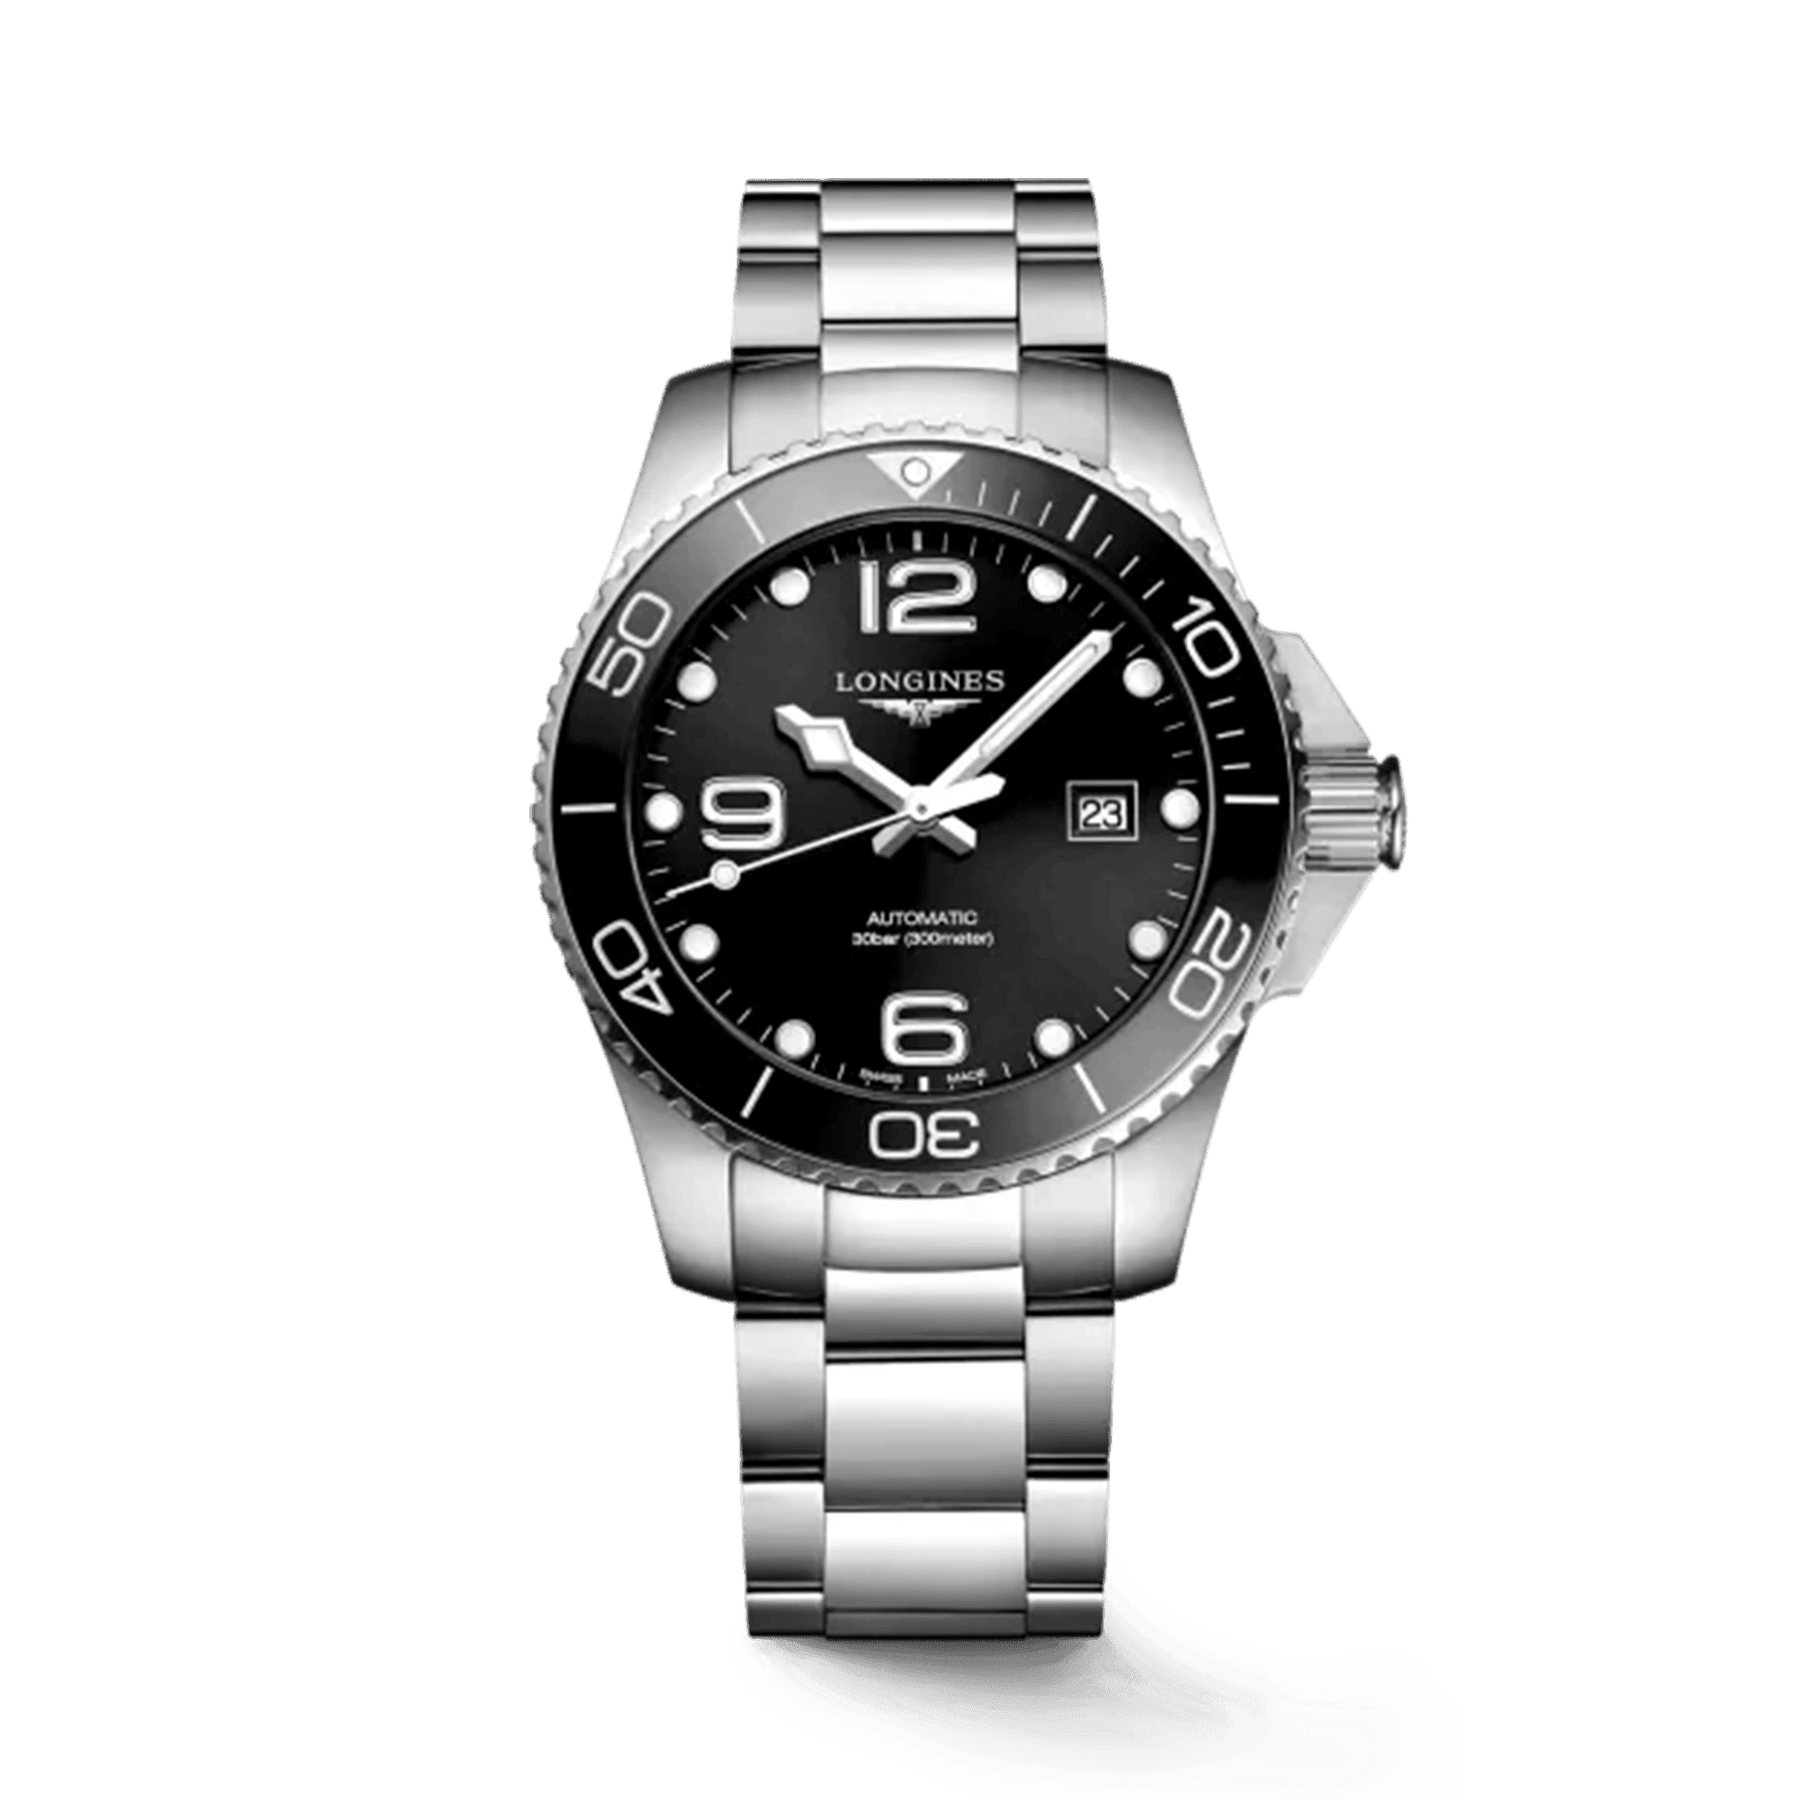 Longines HydroConquest Men's 43mm Ceramic & Stainless Steel Automatic Watch L3.782.4.56.6 - Wallace Bishop